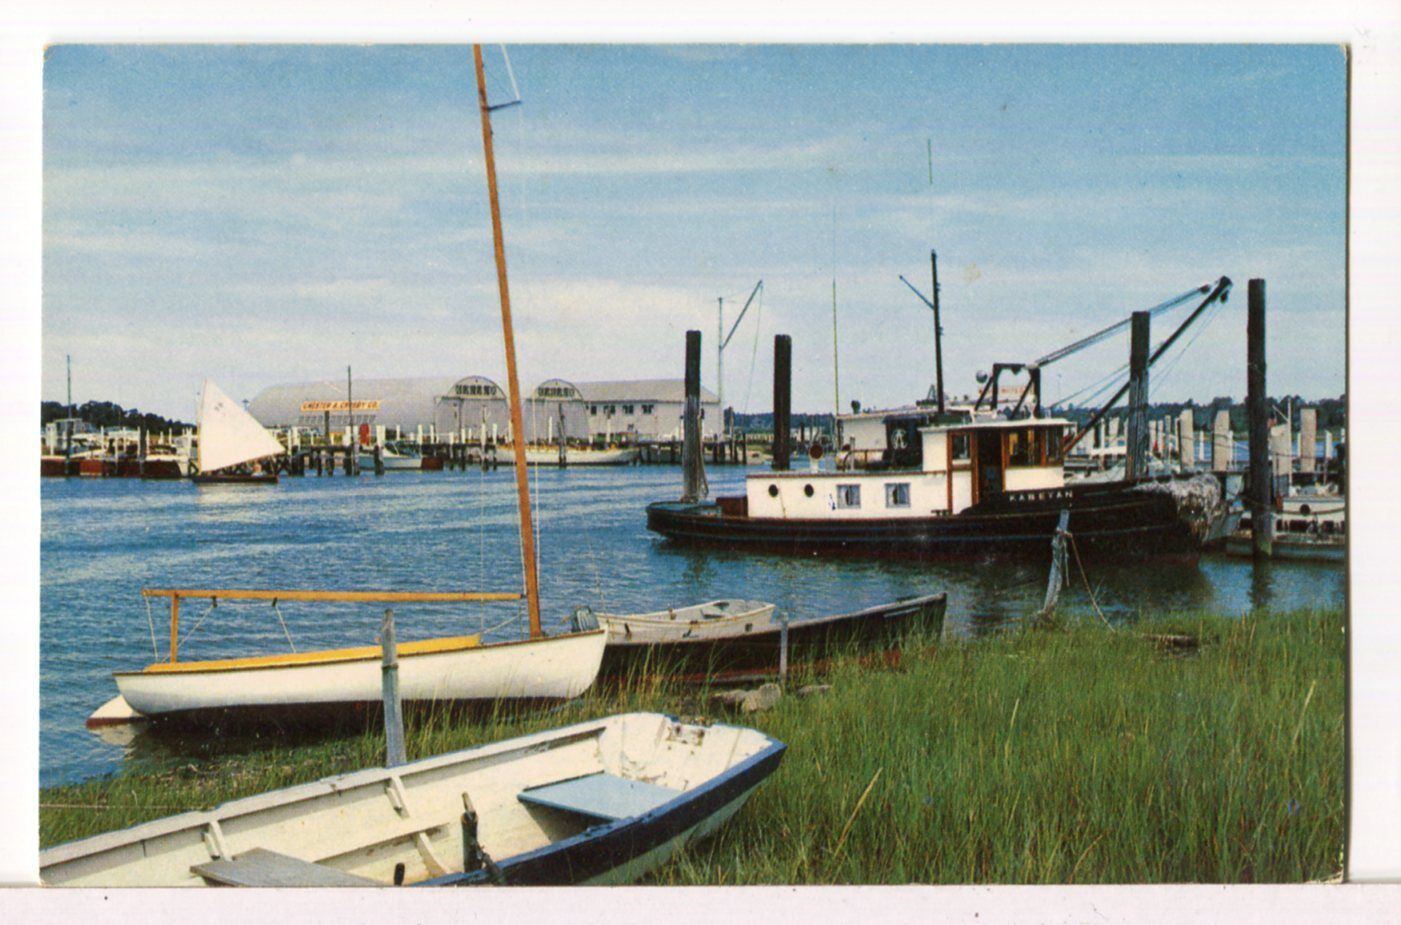 Workboat FABEYAN, Sailboats, Osterville Harbor, Cape Cod MA 1950s Boats Postcard